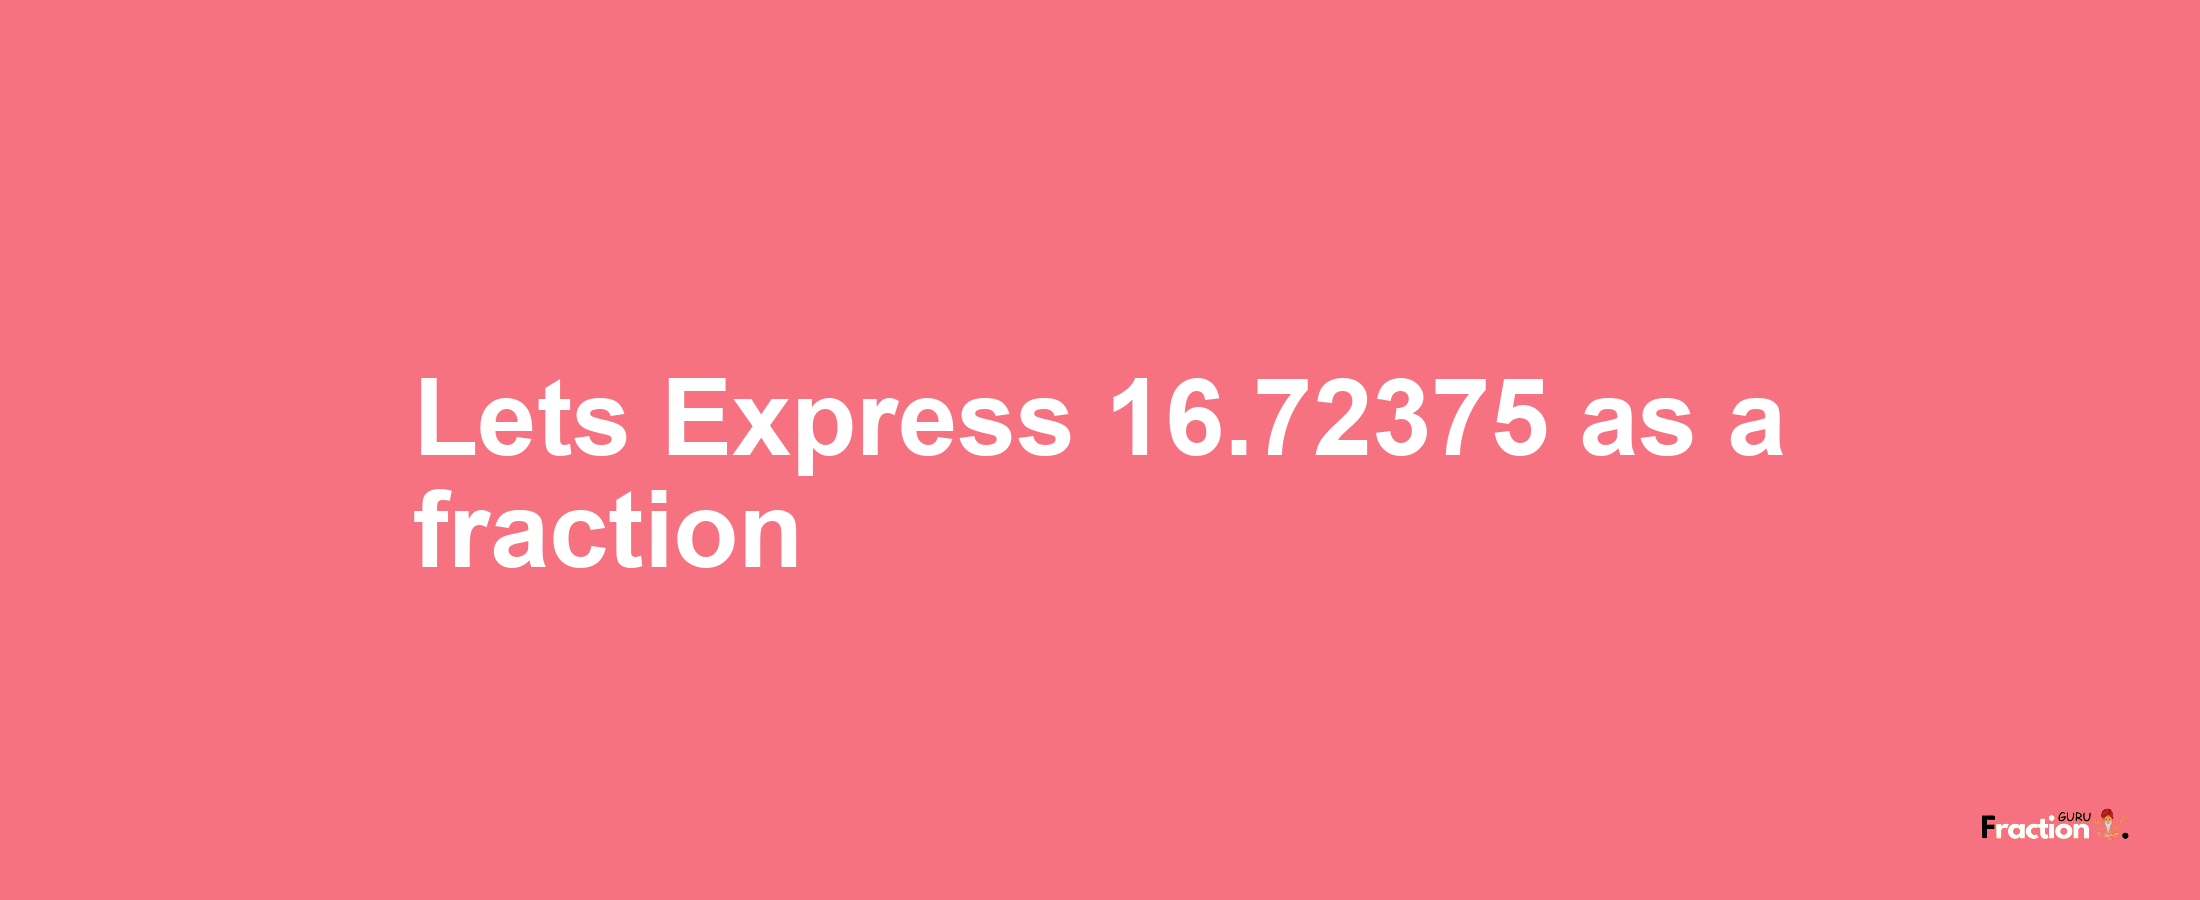 Lets Express 16.72375 as afraction